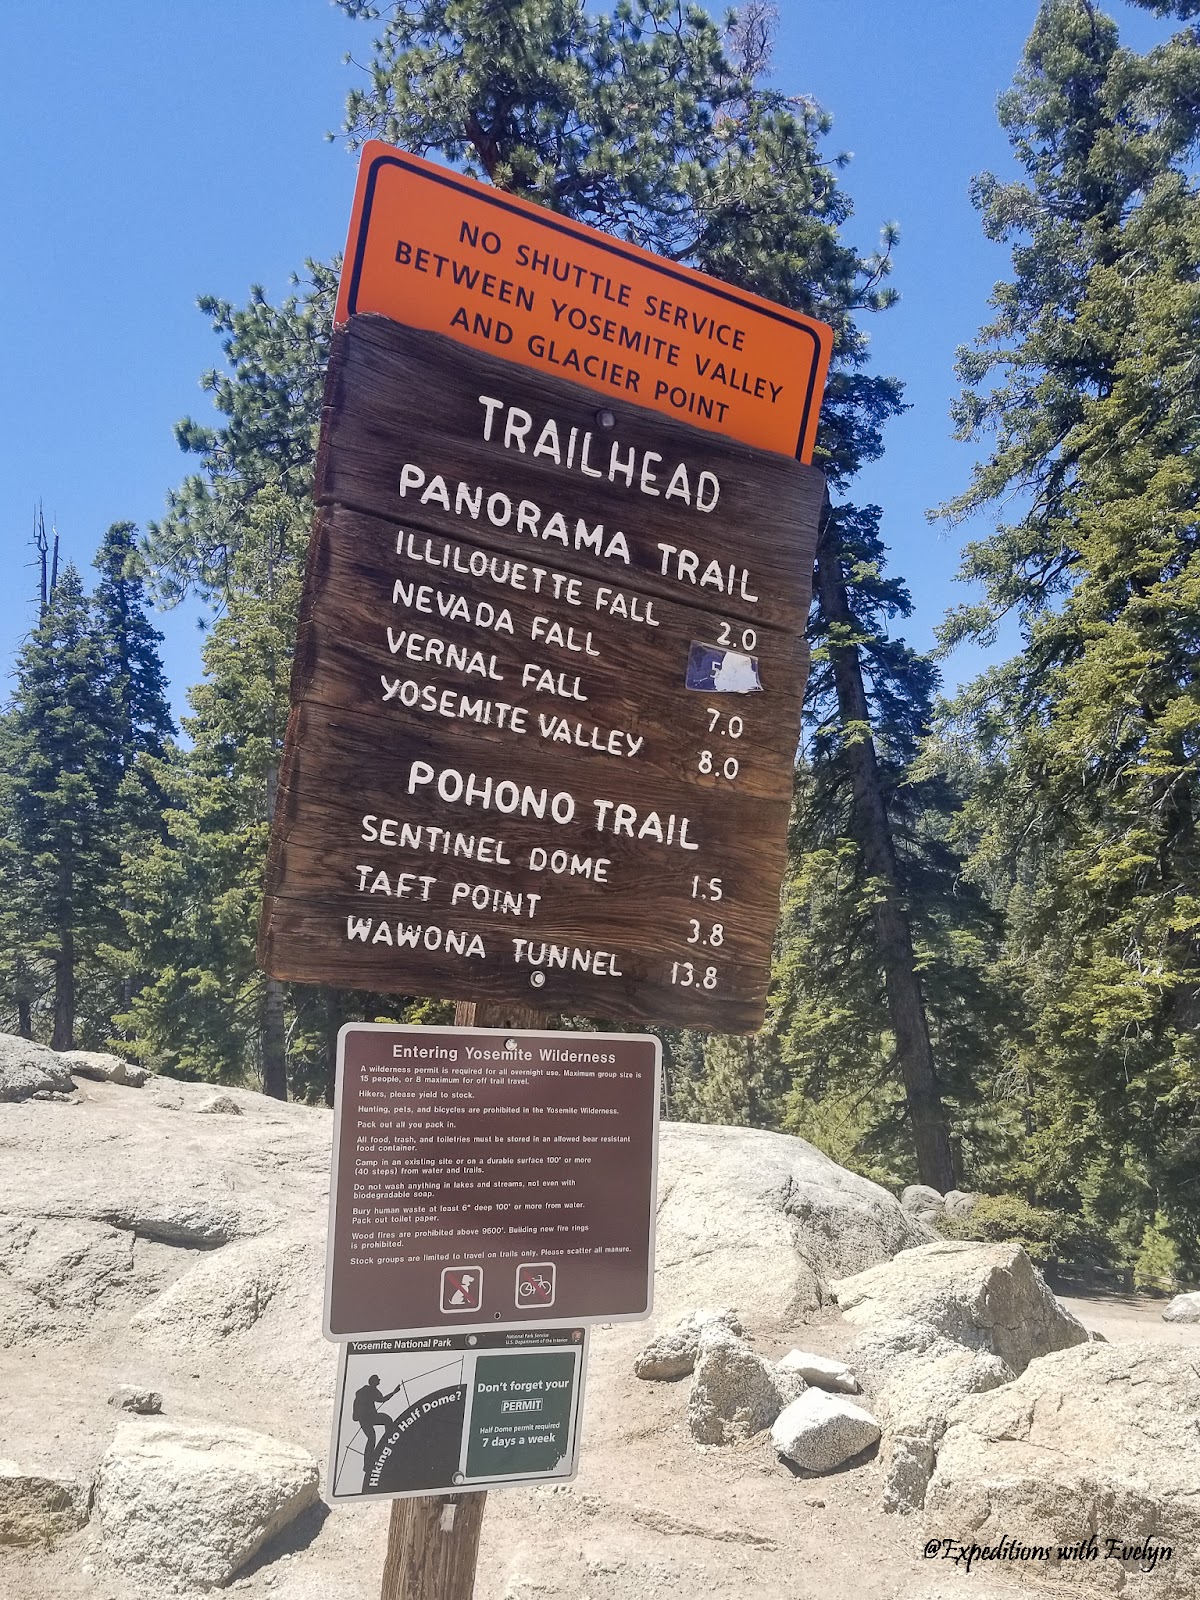 Trailhead marker for the Panorama Trail noting distances to various landmarks, including Illilouette Fall at 2.0 miles.